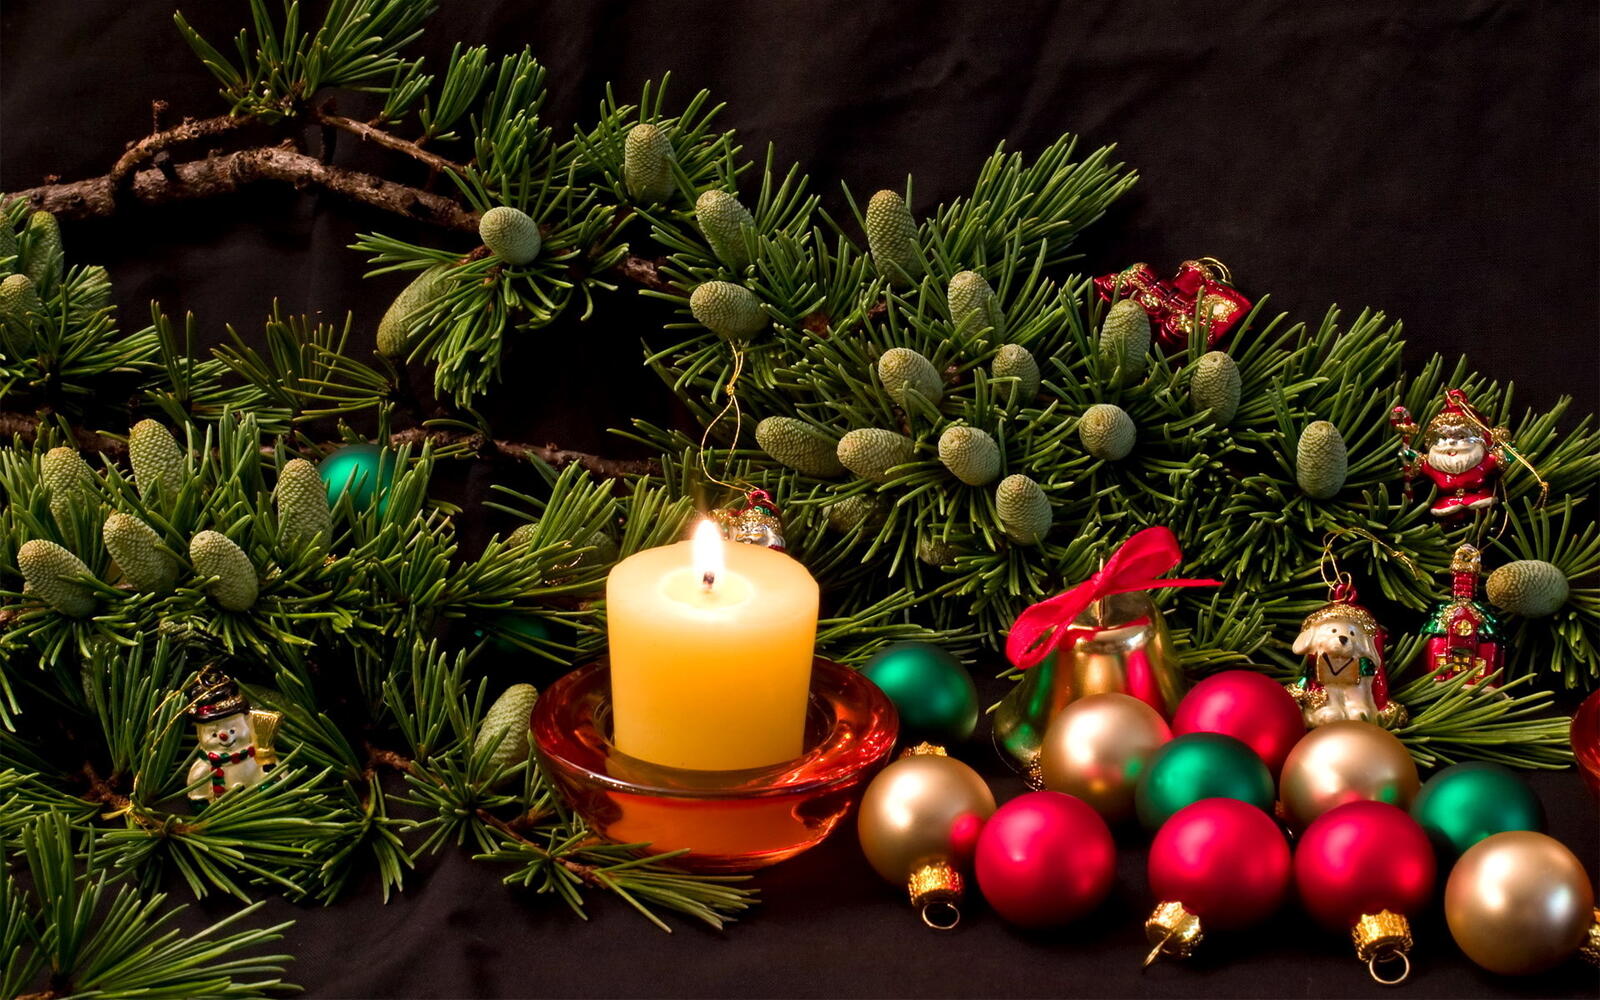 Free photo Burning candle among branches with cones and Christmas balls